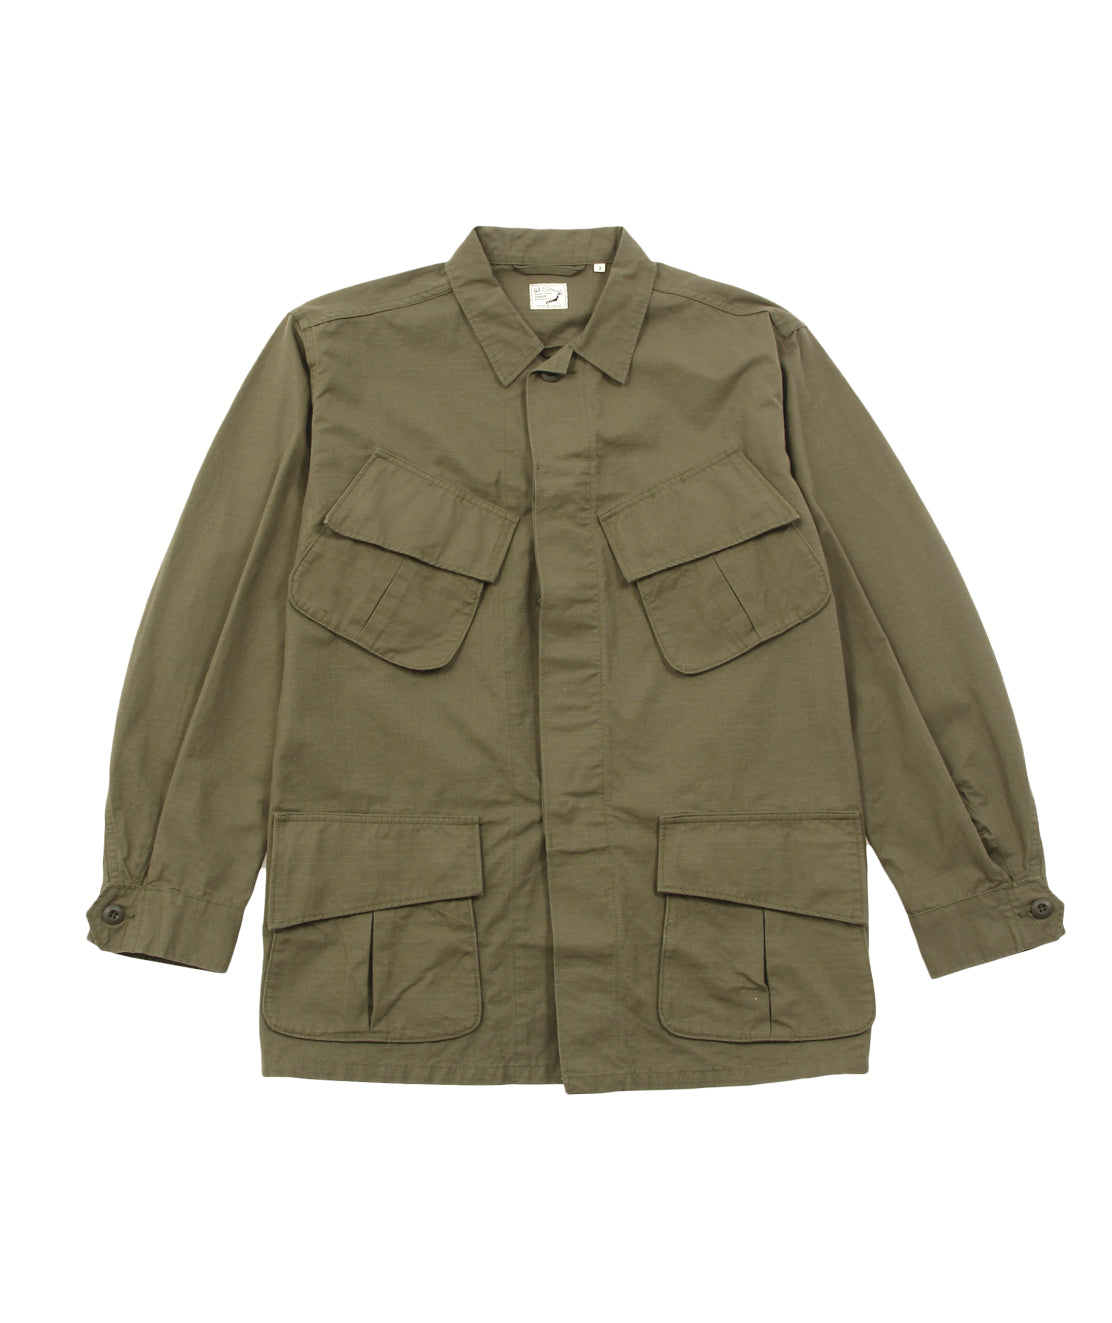 Orslow US Army Tropical Jacket | Shop at Copperfield